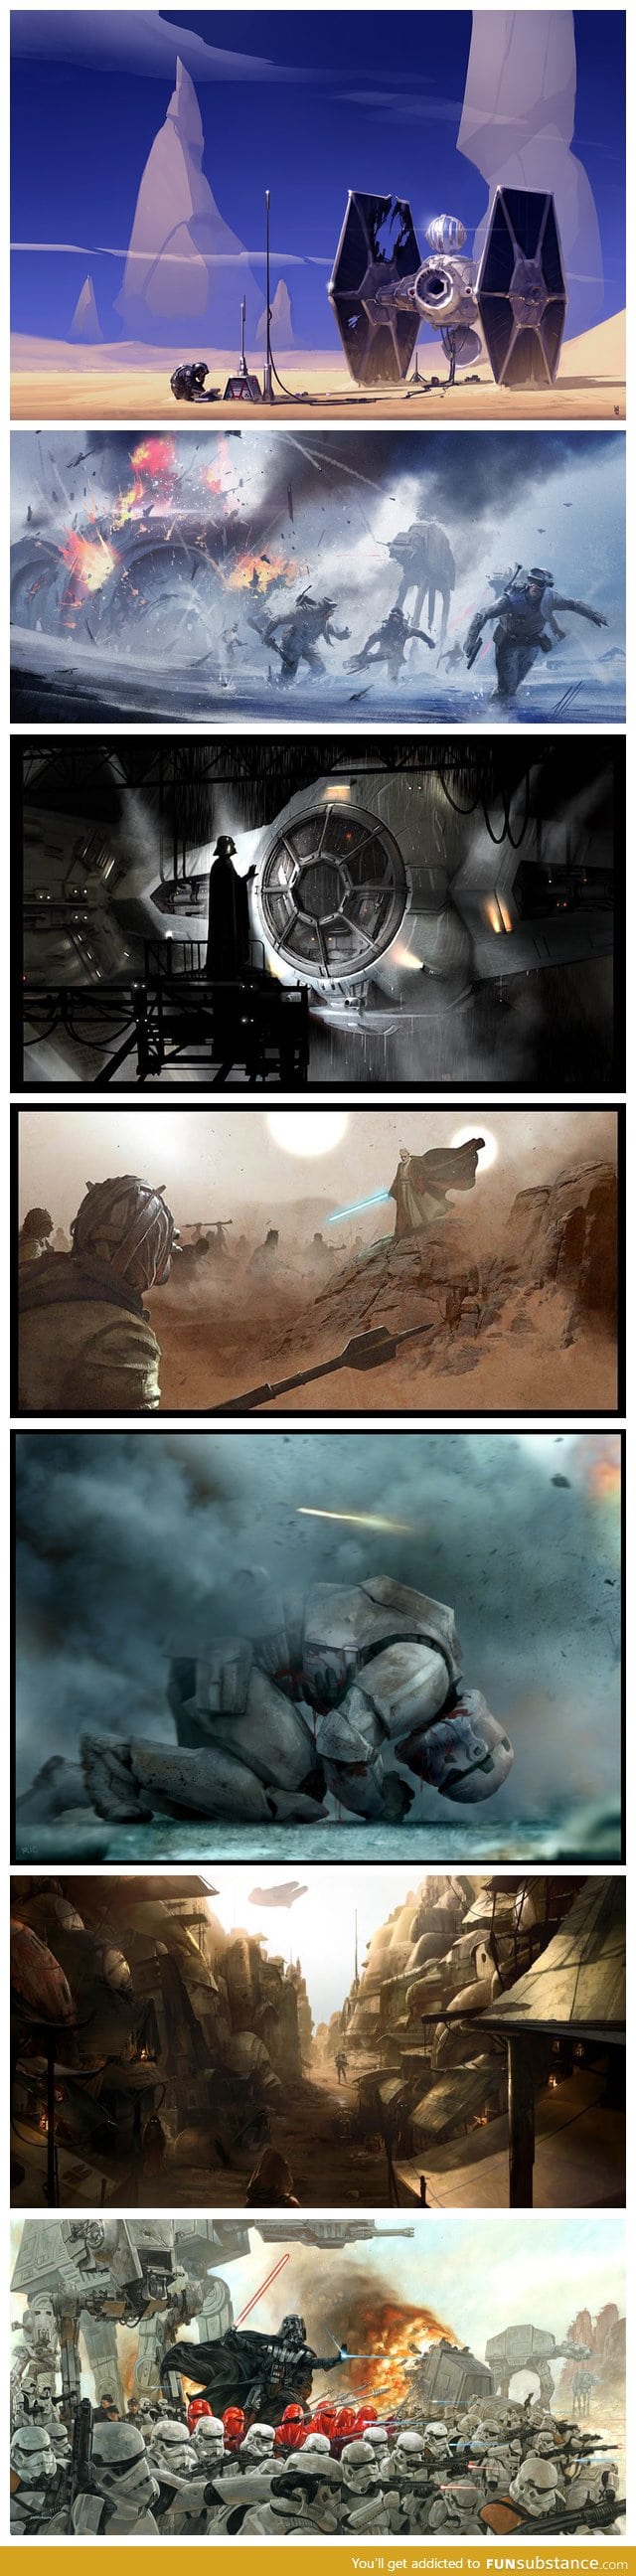 Some awesome Star Wars art